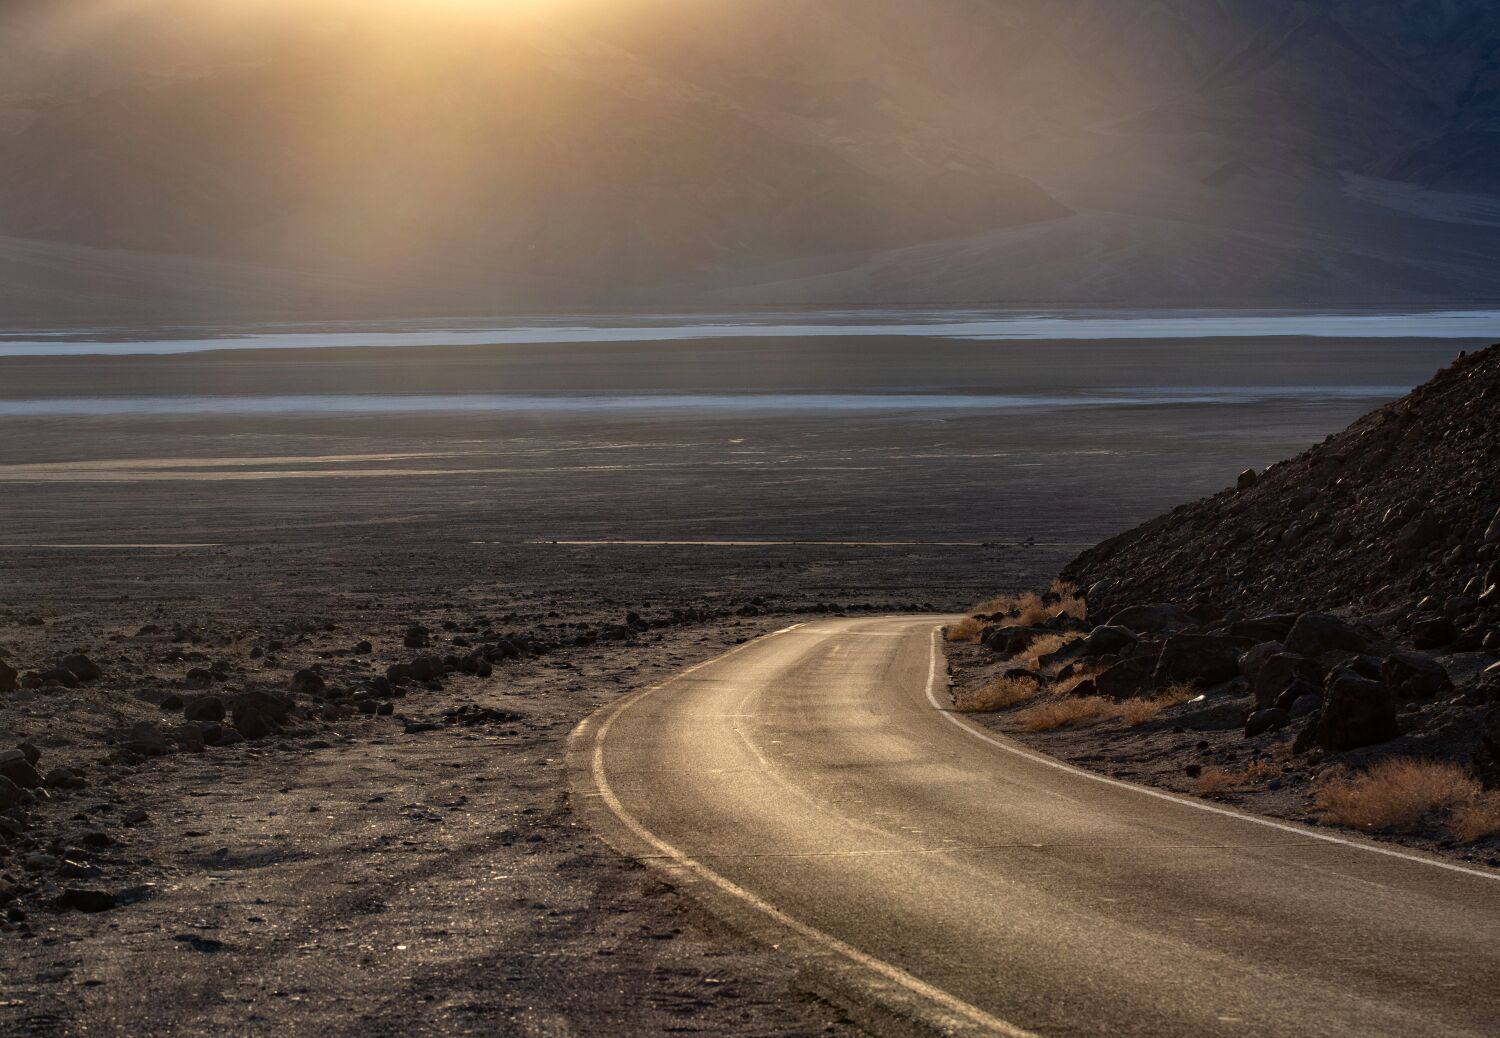 Man found dead in his car in Death Valley National Park, an apparent heat victim